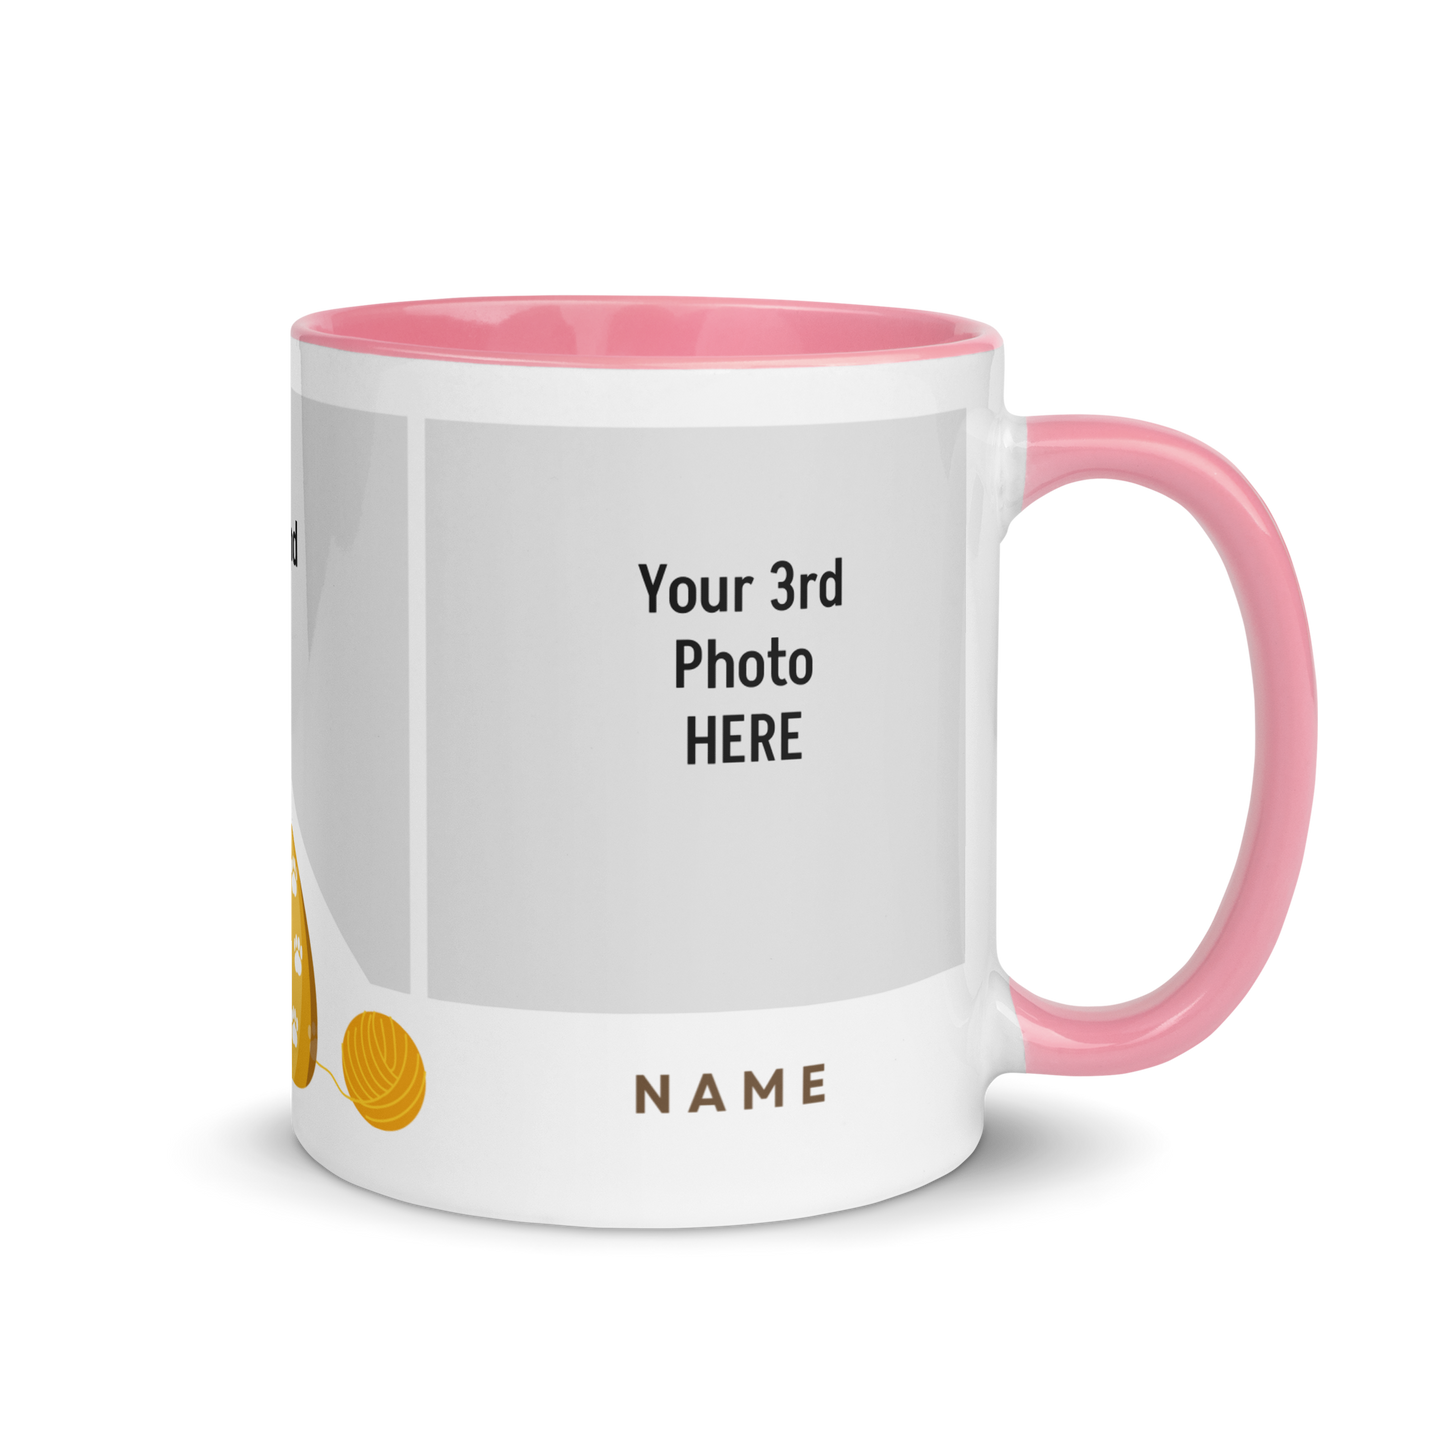 Personalized Coffee Mug 11oz | Add 3 Photos and 2 Name (Cat Themed)